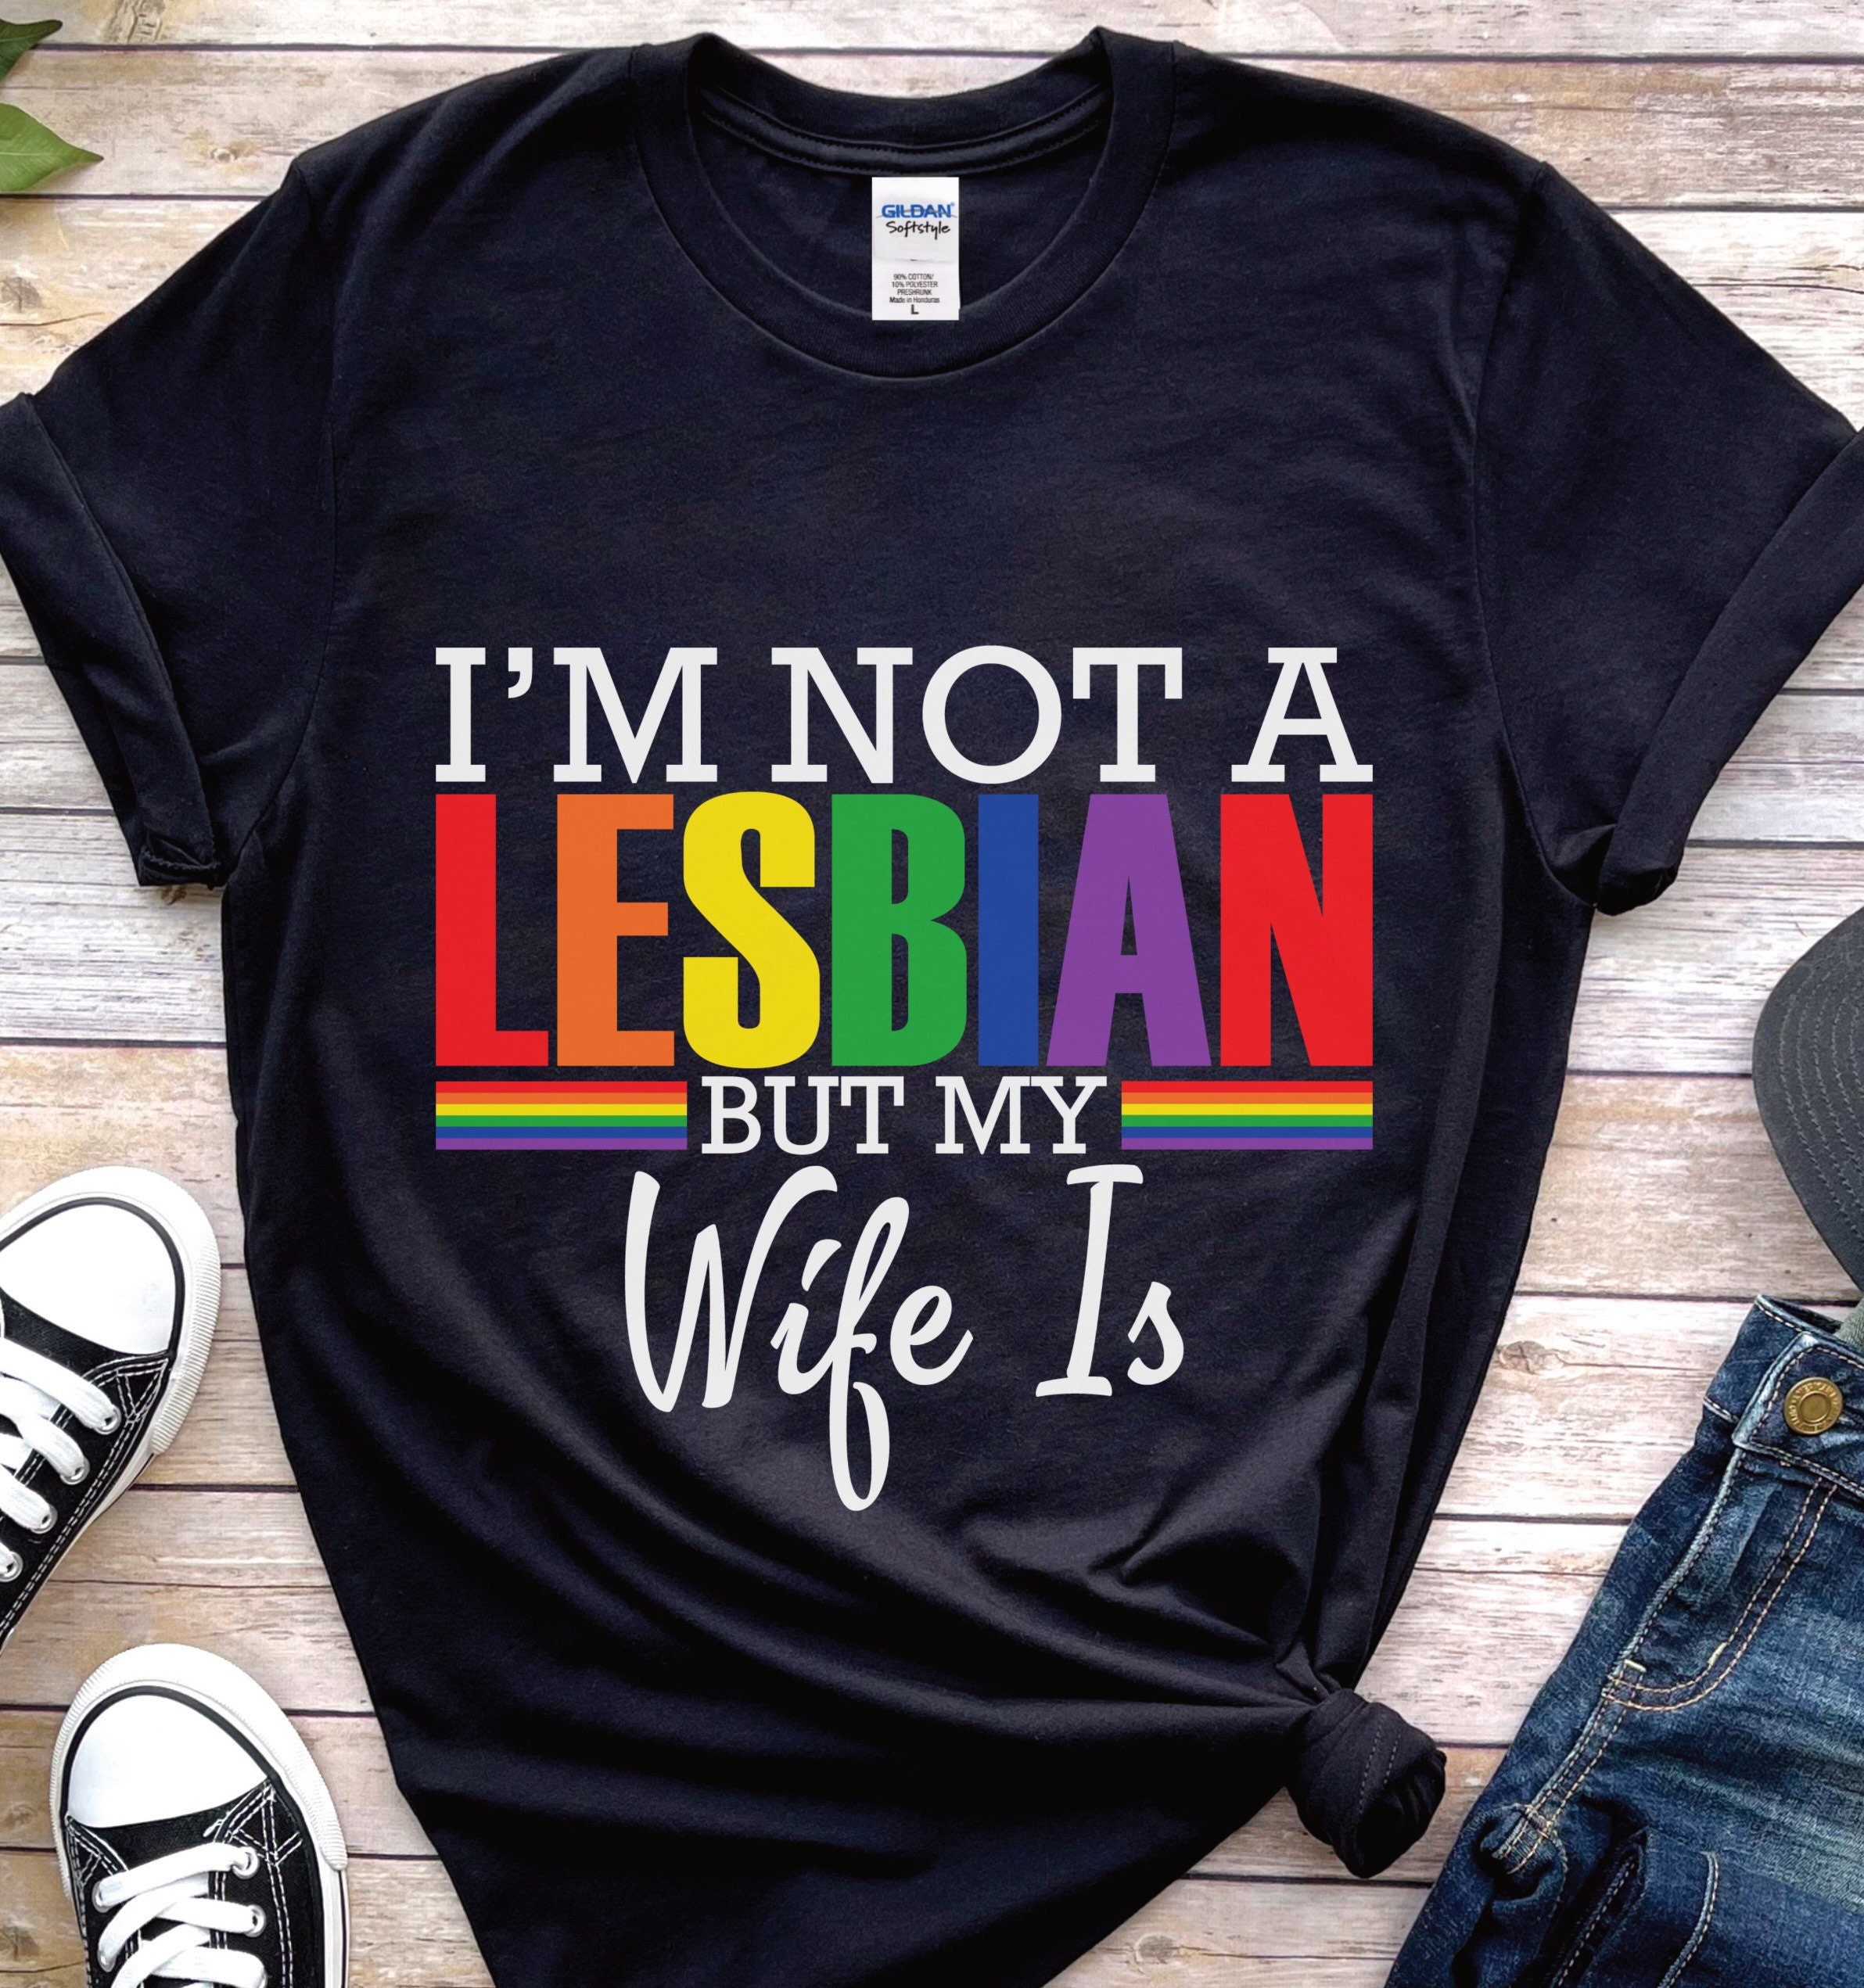 Funny Lesbian Married Couples Shirts Sapphic Shirt Just hq pic